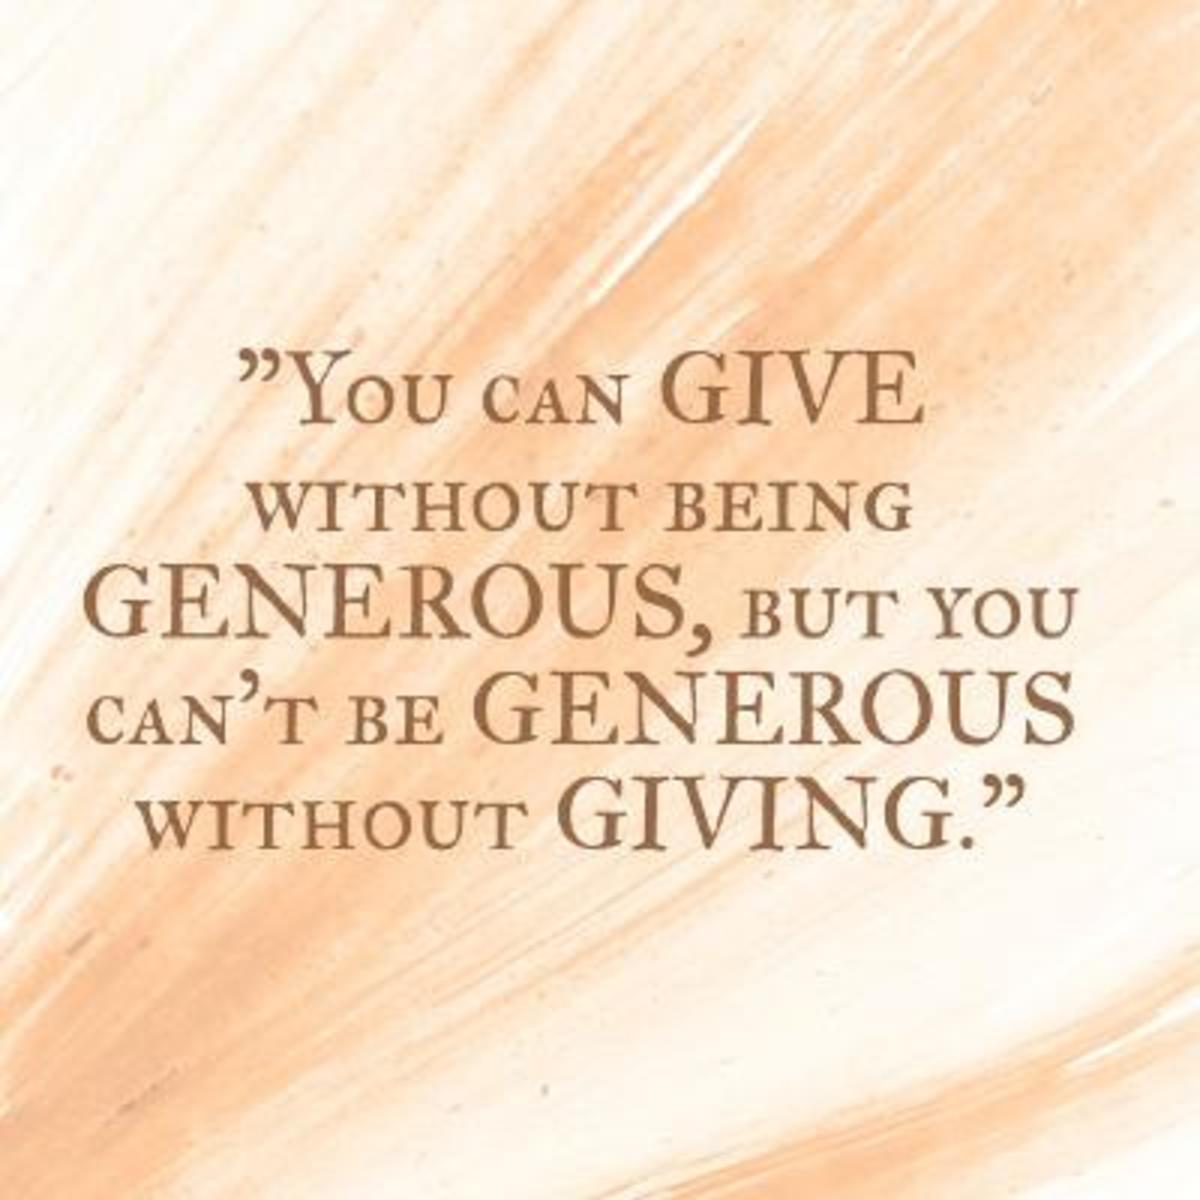 what-the-bible-says-about-generosity